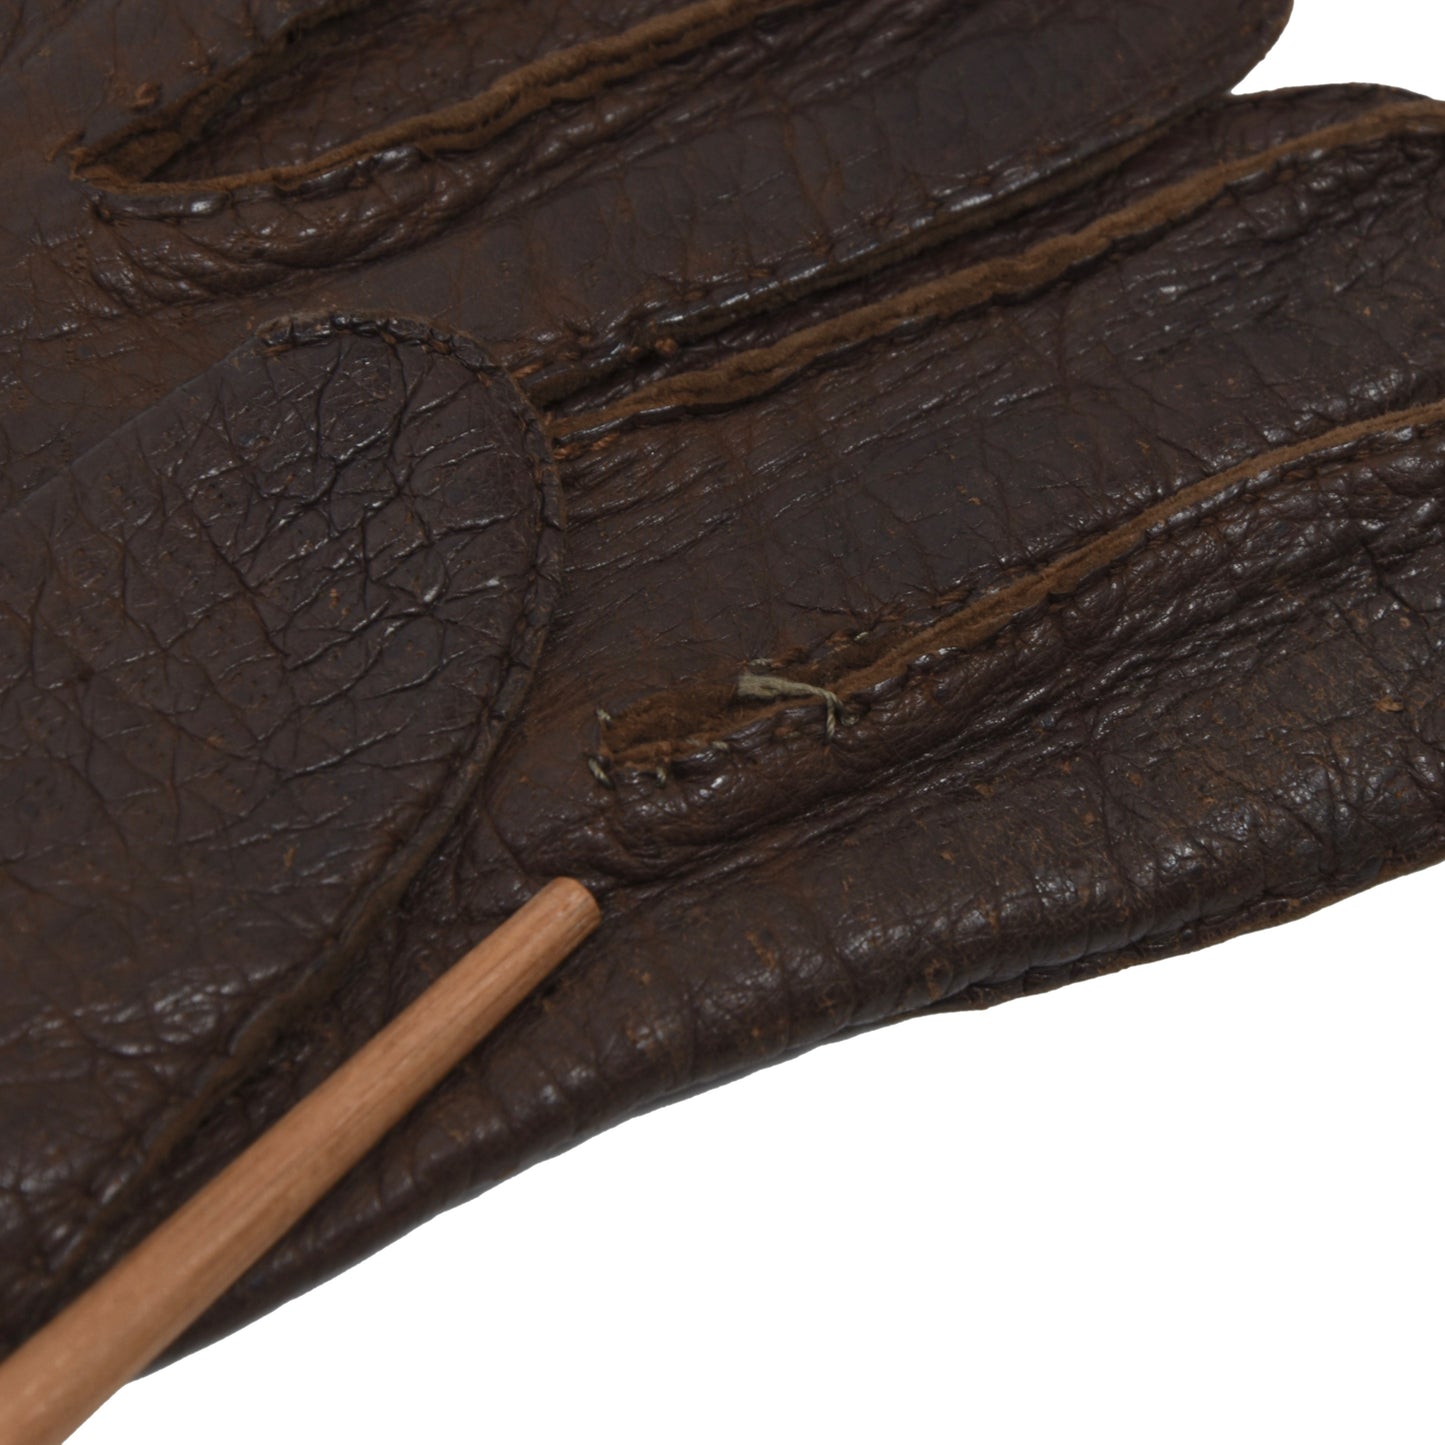 Unlined Peccary Gloves - Chocolate Brown